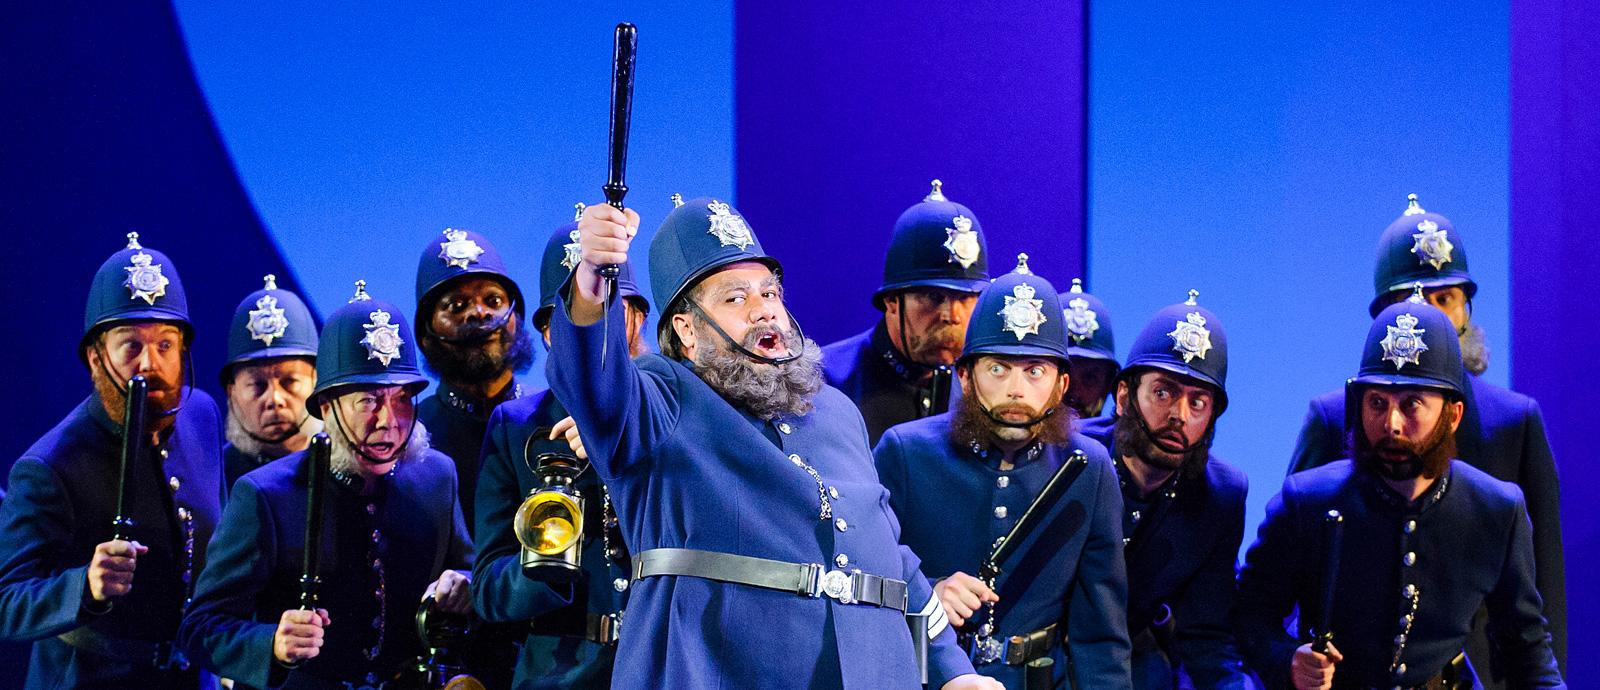 ENO's The Pirates of Penzance - Jonathan Lemalu as Sergeant of Police and Company. Photo by Tristram Kenton